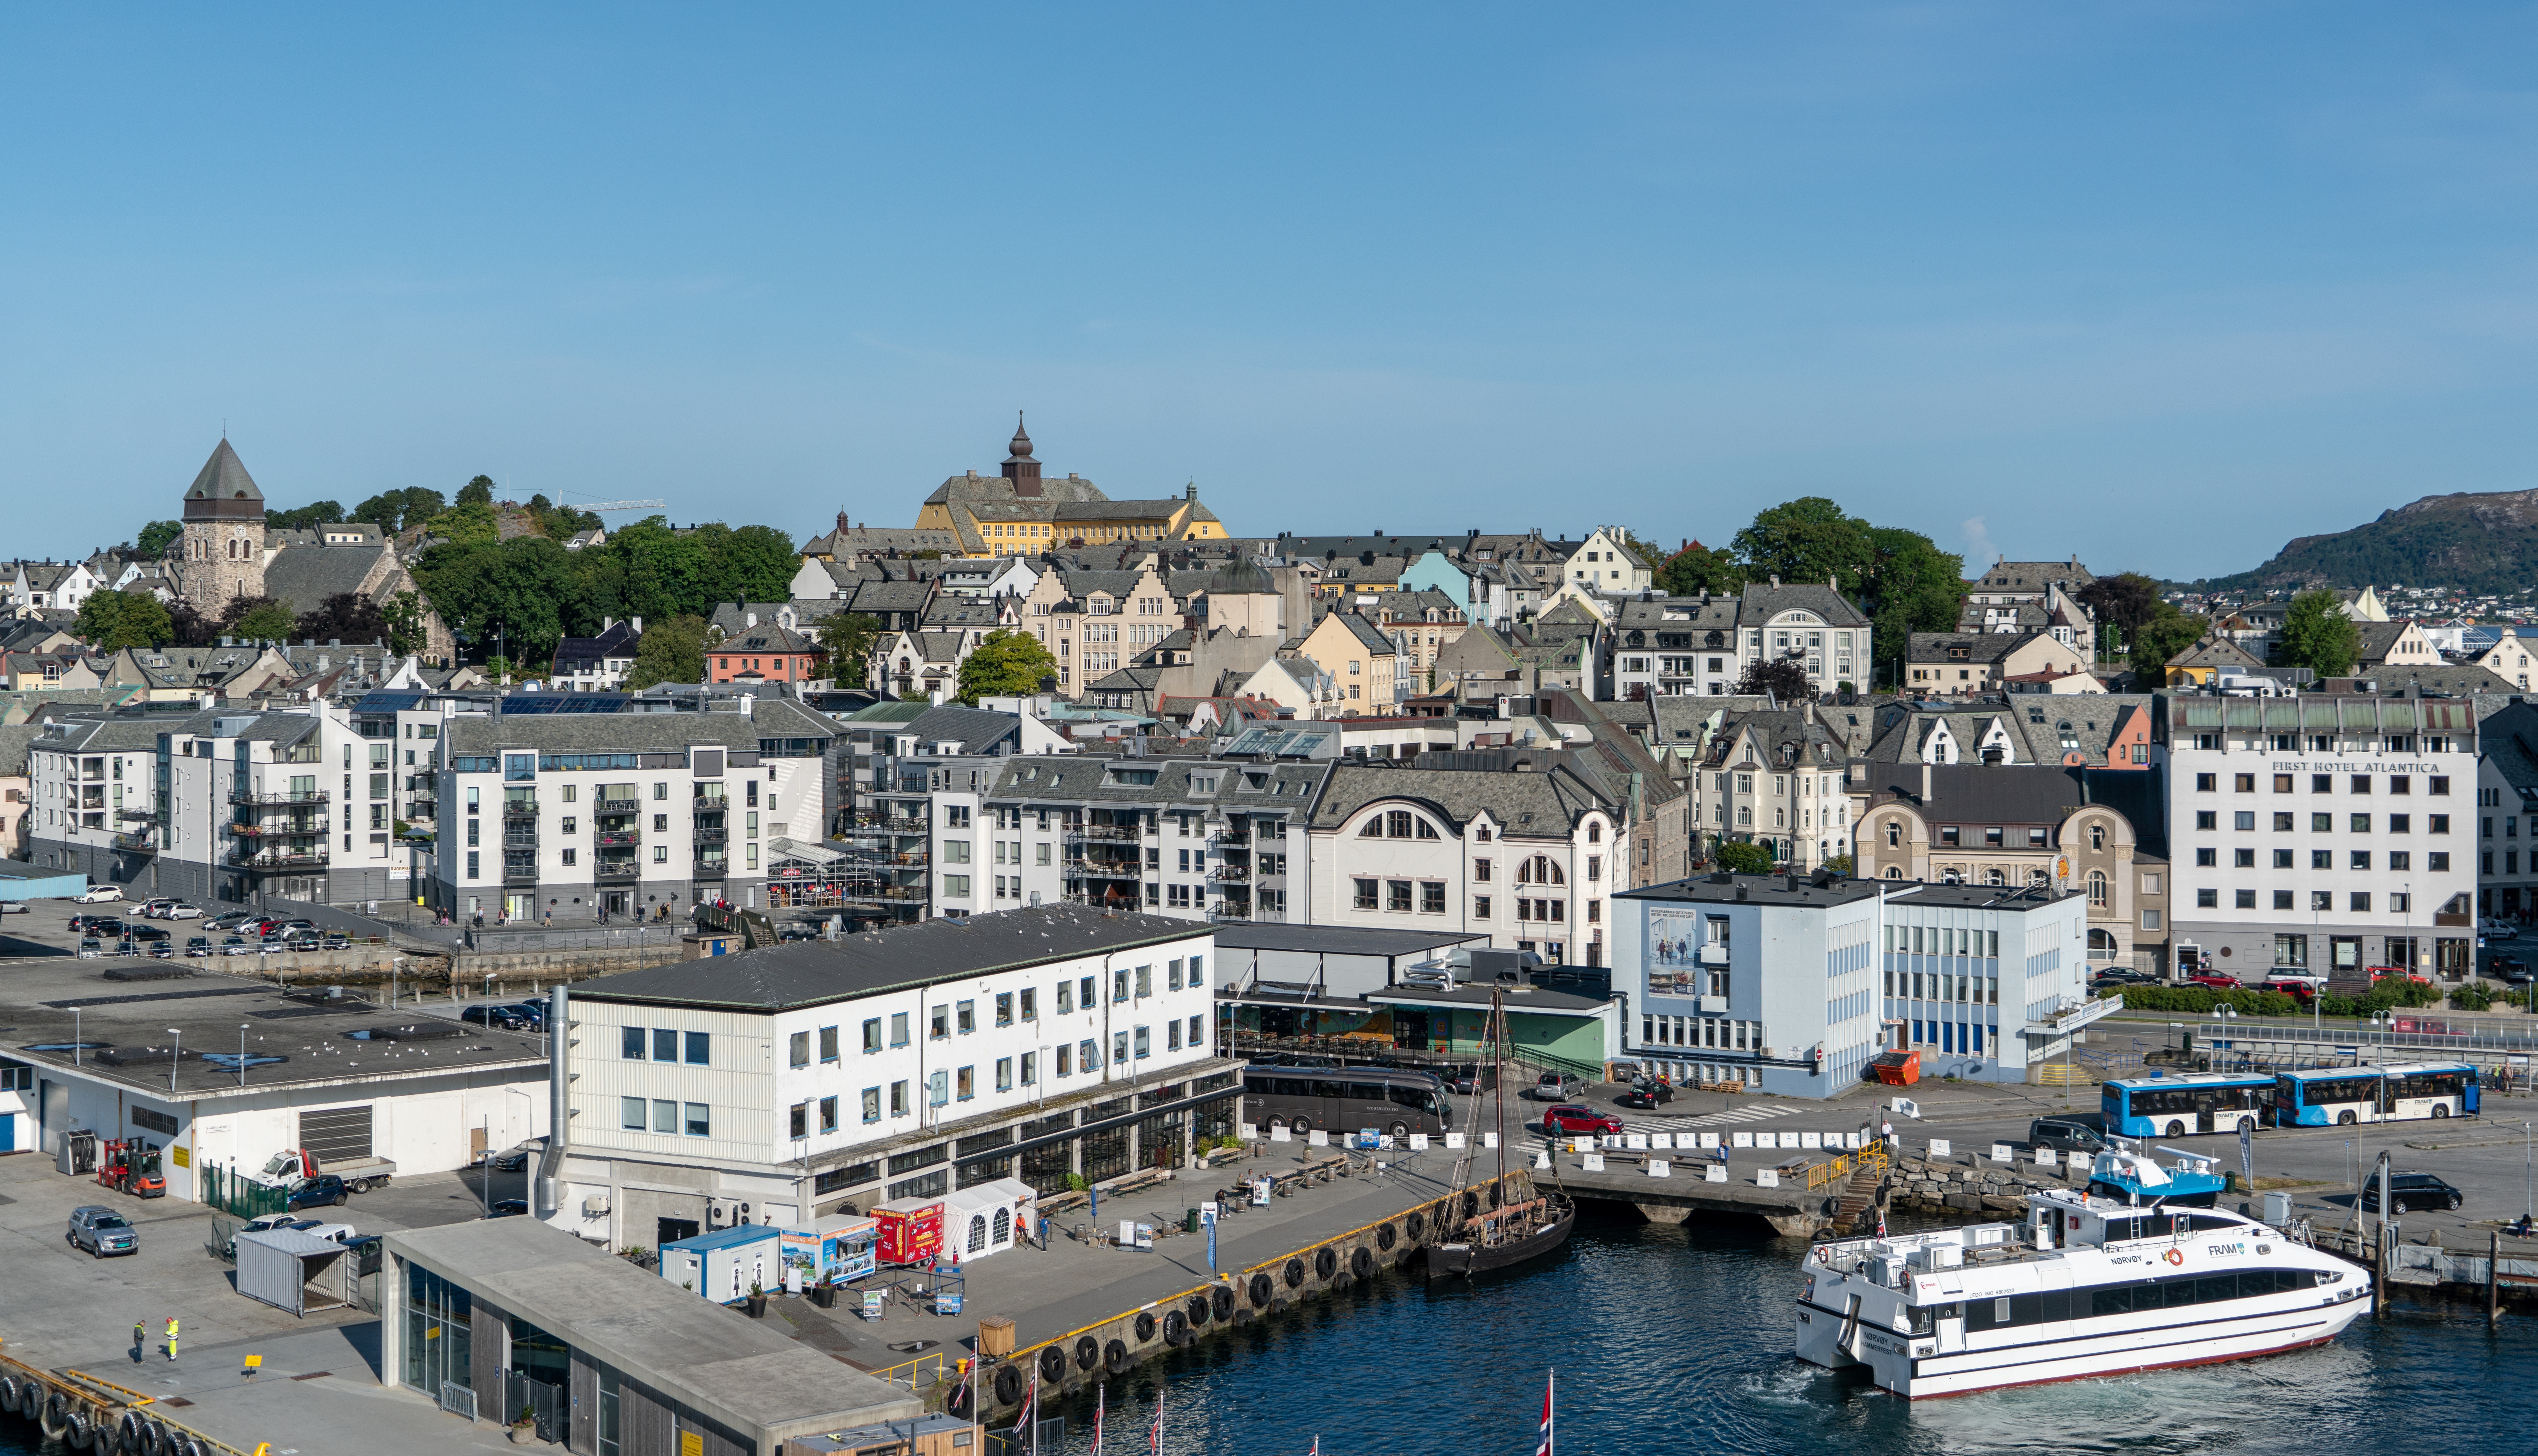 Wallpaper Norway Alesund The Og Romsdal Marinas Cities 7640x4384